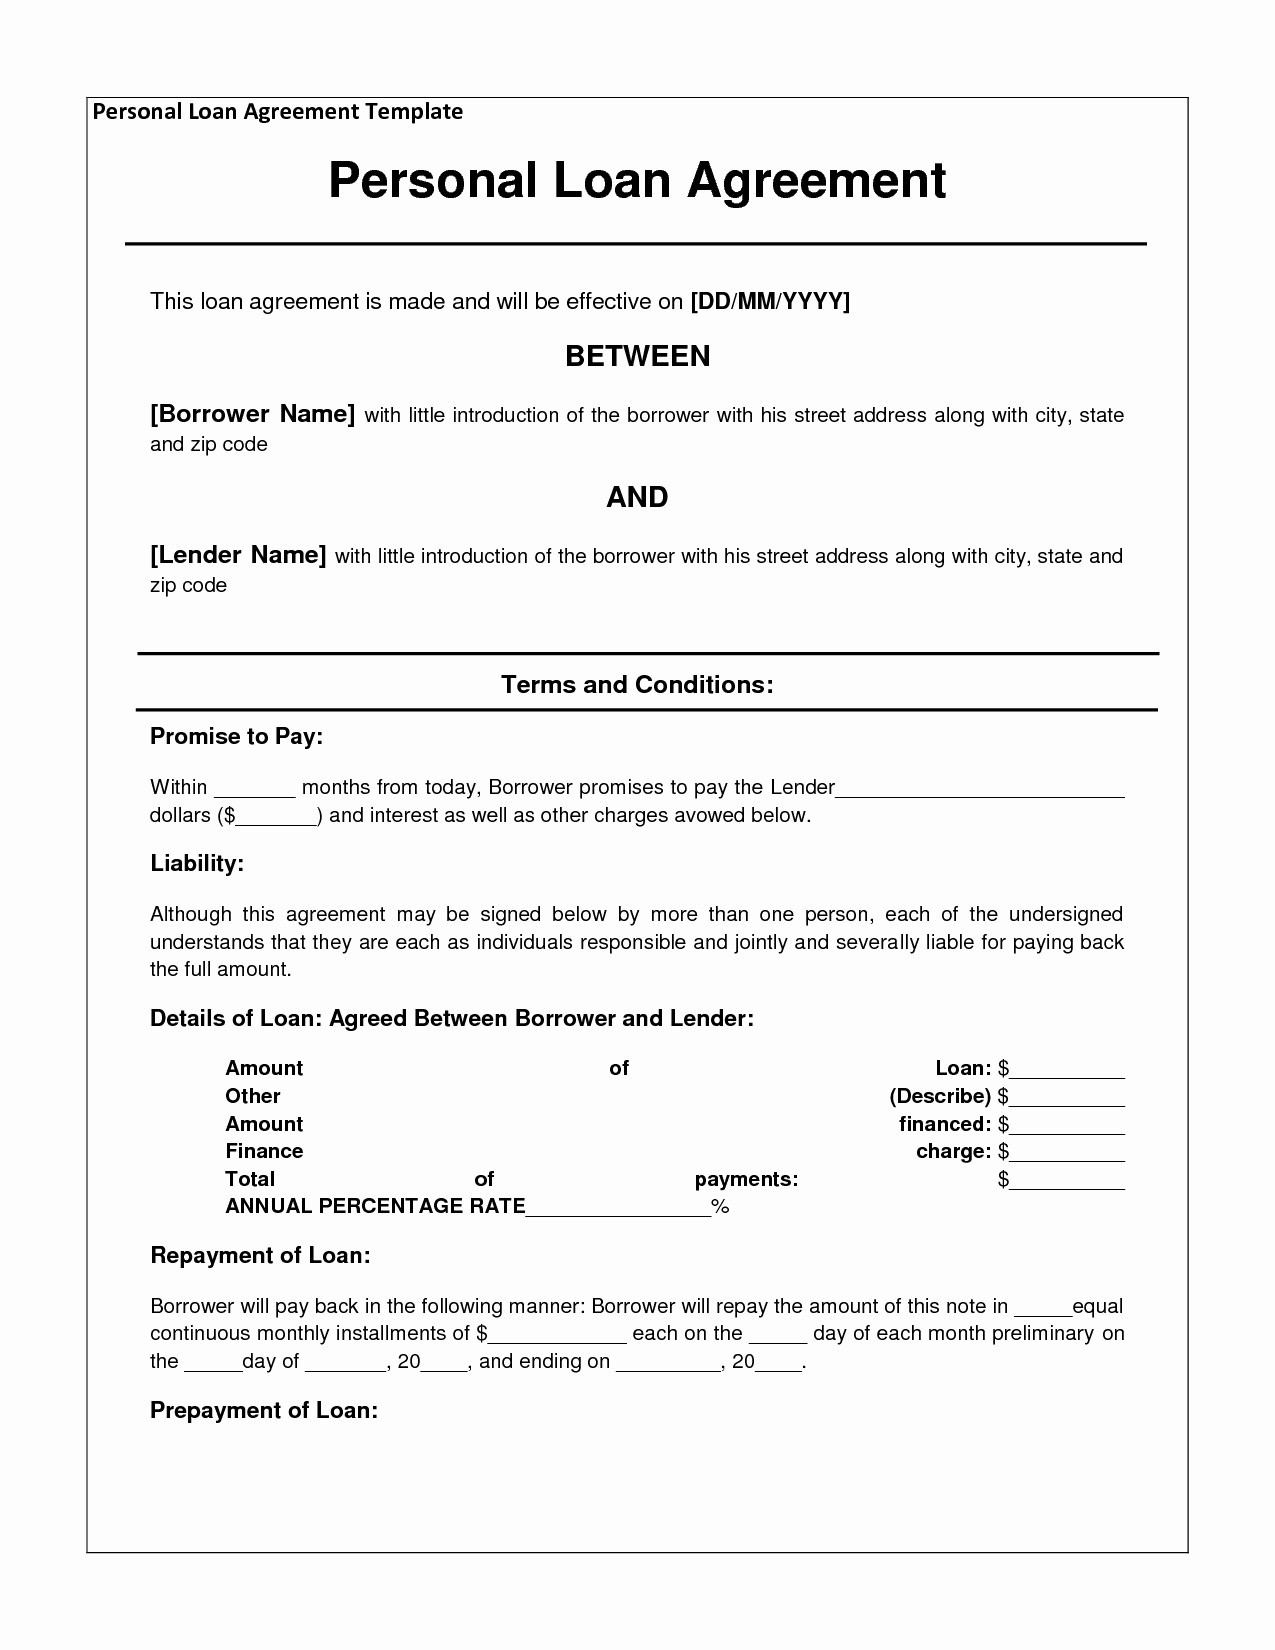 Personal Loan form Template Best Of Free Personal Loan Agreement form Template $1000